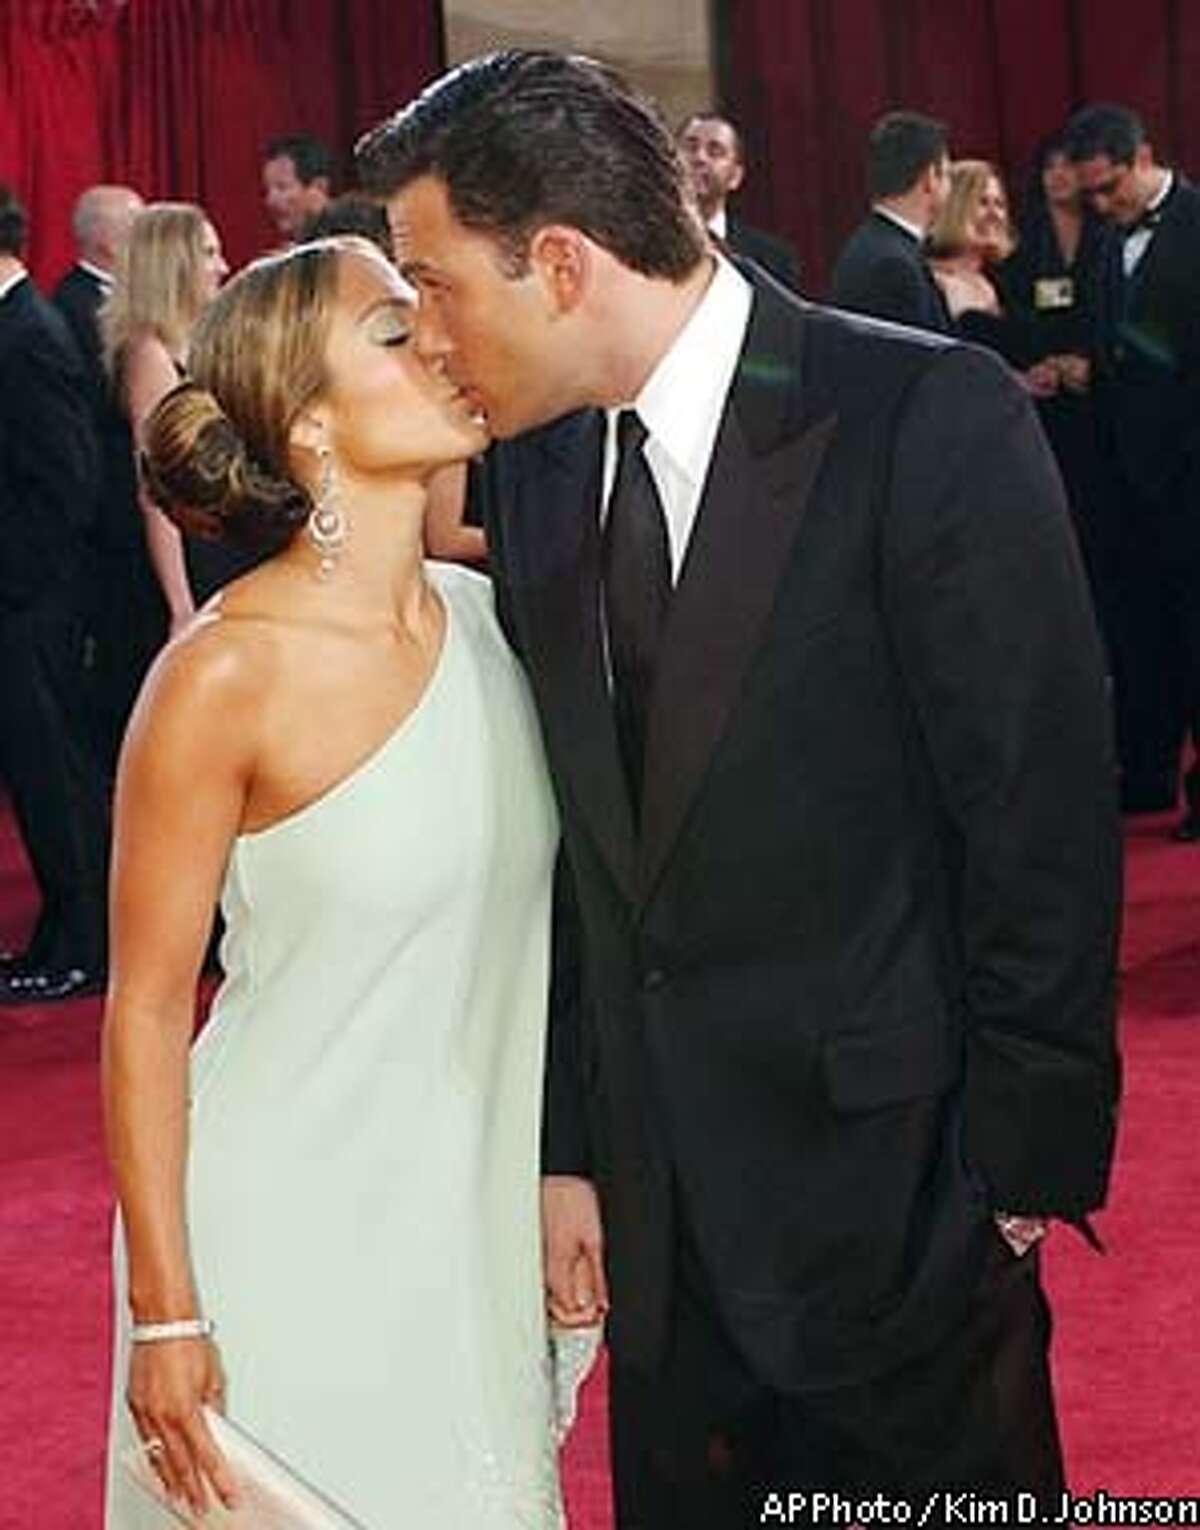 Actors Jennifer Lopez and her fianc Ben Affleck kiss during their arrival for the 75th annual Academy Awards Sunday, March 23, 2003, in Los Angeles where they will be presenters during the show. (AP Photo/(AP Photo/Kim D. Johnson)